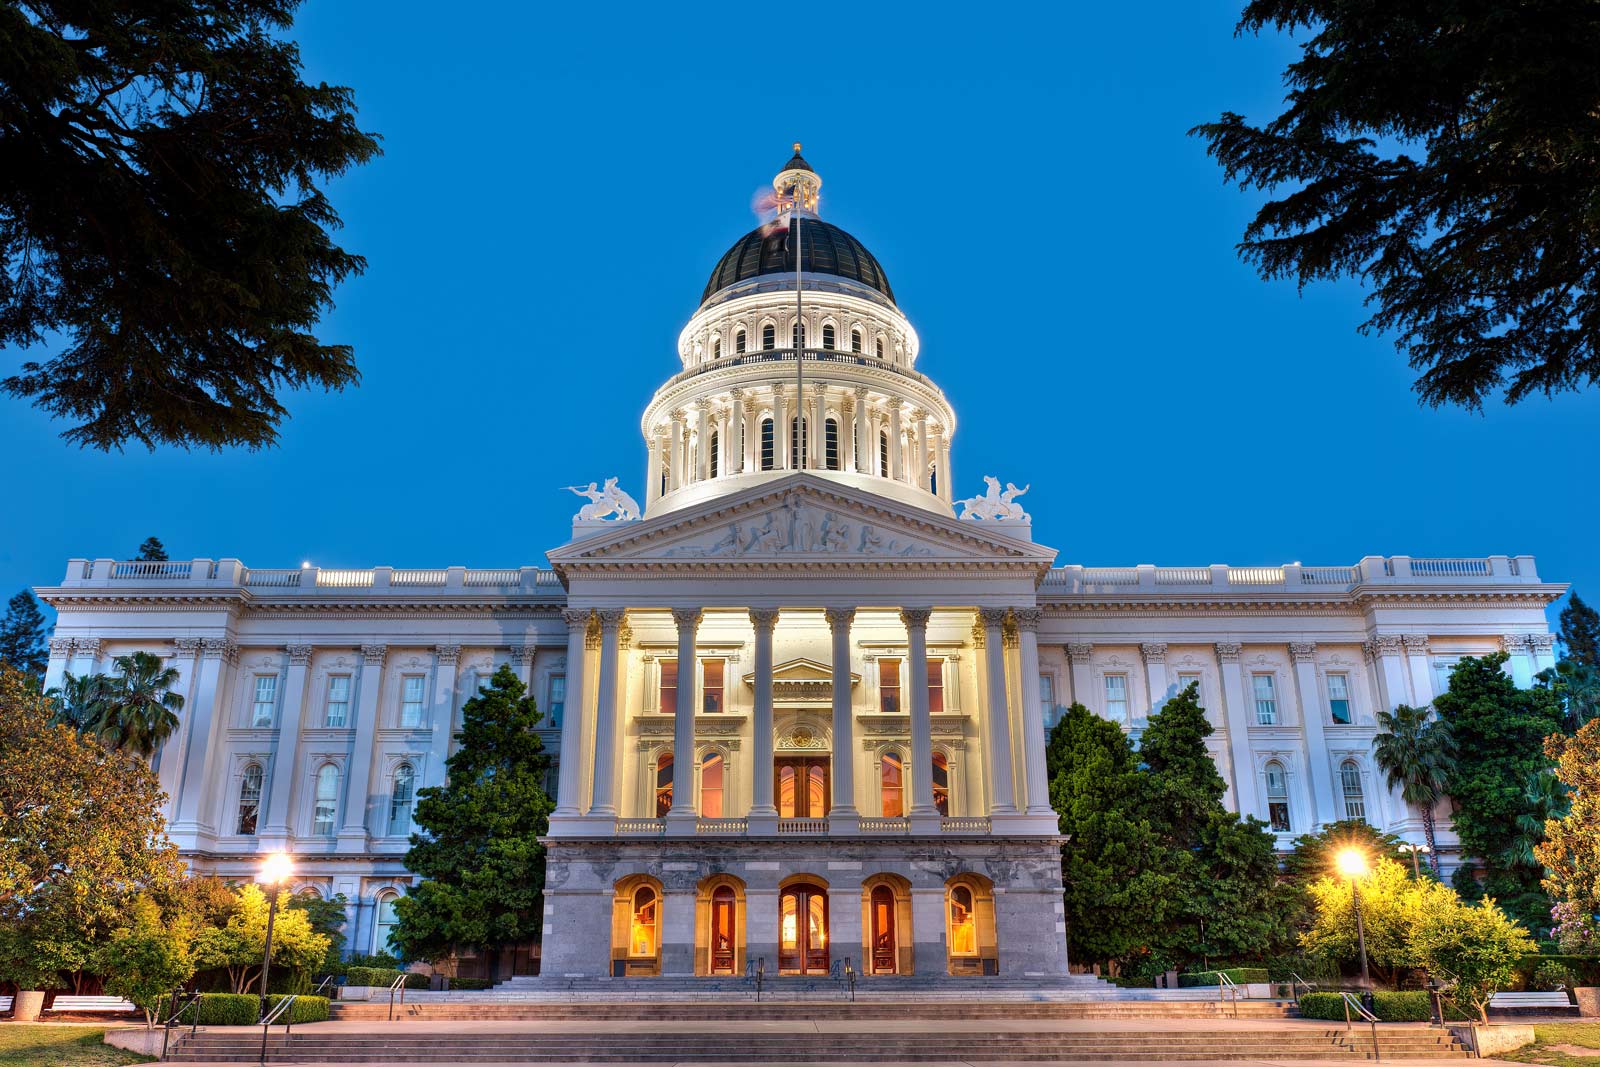 Things to do in Sacramento state capital museum